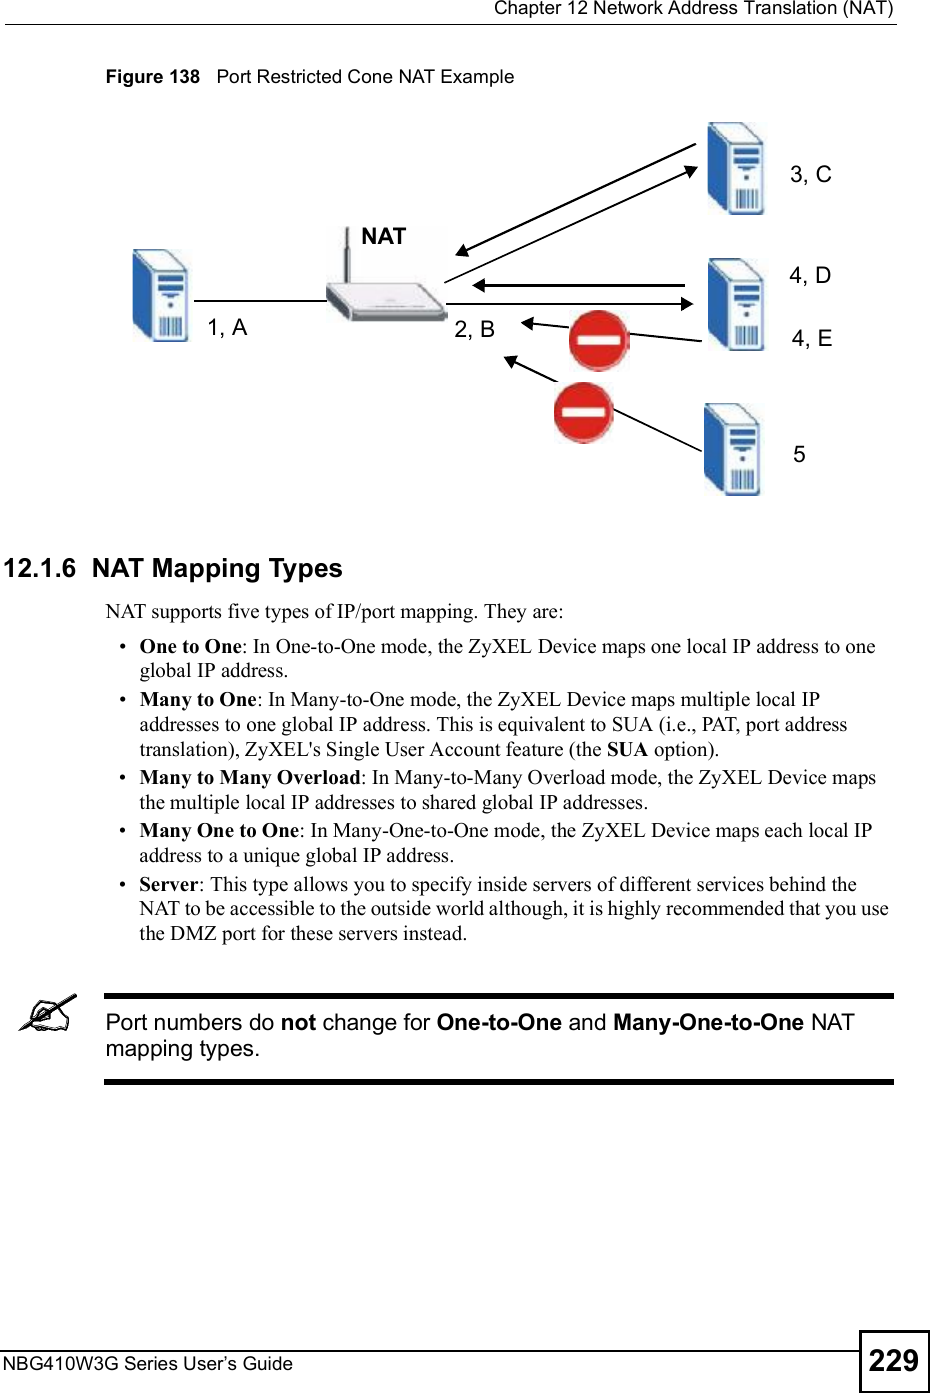  Chapter 12Network Address Translation (NAT)NBG410W3G Series User s Guide 229Figure 138   Port Restricted Cone NAT Example12.1.6  NAT Mapping TypesNAT supports five types of IP/port mapping. They are: One to One: In One-to-One mode, the ZyXEL Device maps one local IP address to one global IP address. Many to One: In Many-to-One mode, the ZyXEL Device maps multiple local IP addresses to one global IP address. This is equivalent to SUA (i.e., PAT, port address translation), ZyXEL&apos;s Single User Account feature (the SUA option).  Many to Many Overload: In Many-to-Many Overload mode, the ZyXEL Device maps the multiple local IP addresses to shared global IP addresses. Many One to One: In Many-One-to-One mode, the ZyXEL Device maps each local IP address to a unique global IP address.  Server: This type allows you to specify inside servers of different services behind the NAT to be accessible to the outside world although, it is highly recommended that you use the DMZ port for these servers instead.Port numbers do not change for One-to-One and Many-One-to-One NAT mapping types. NAT1, A 2, B3, C4, D4, E5